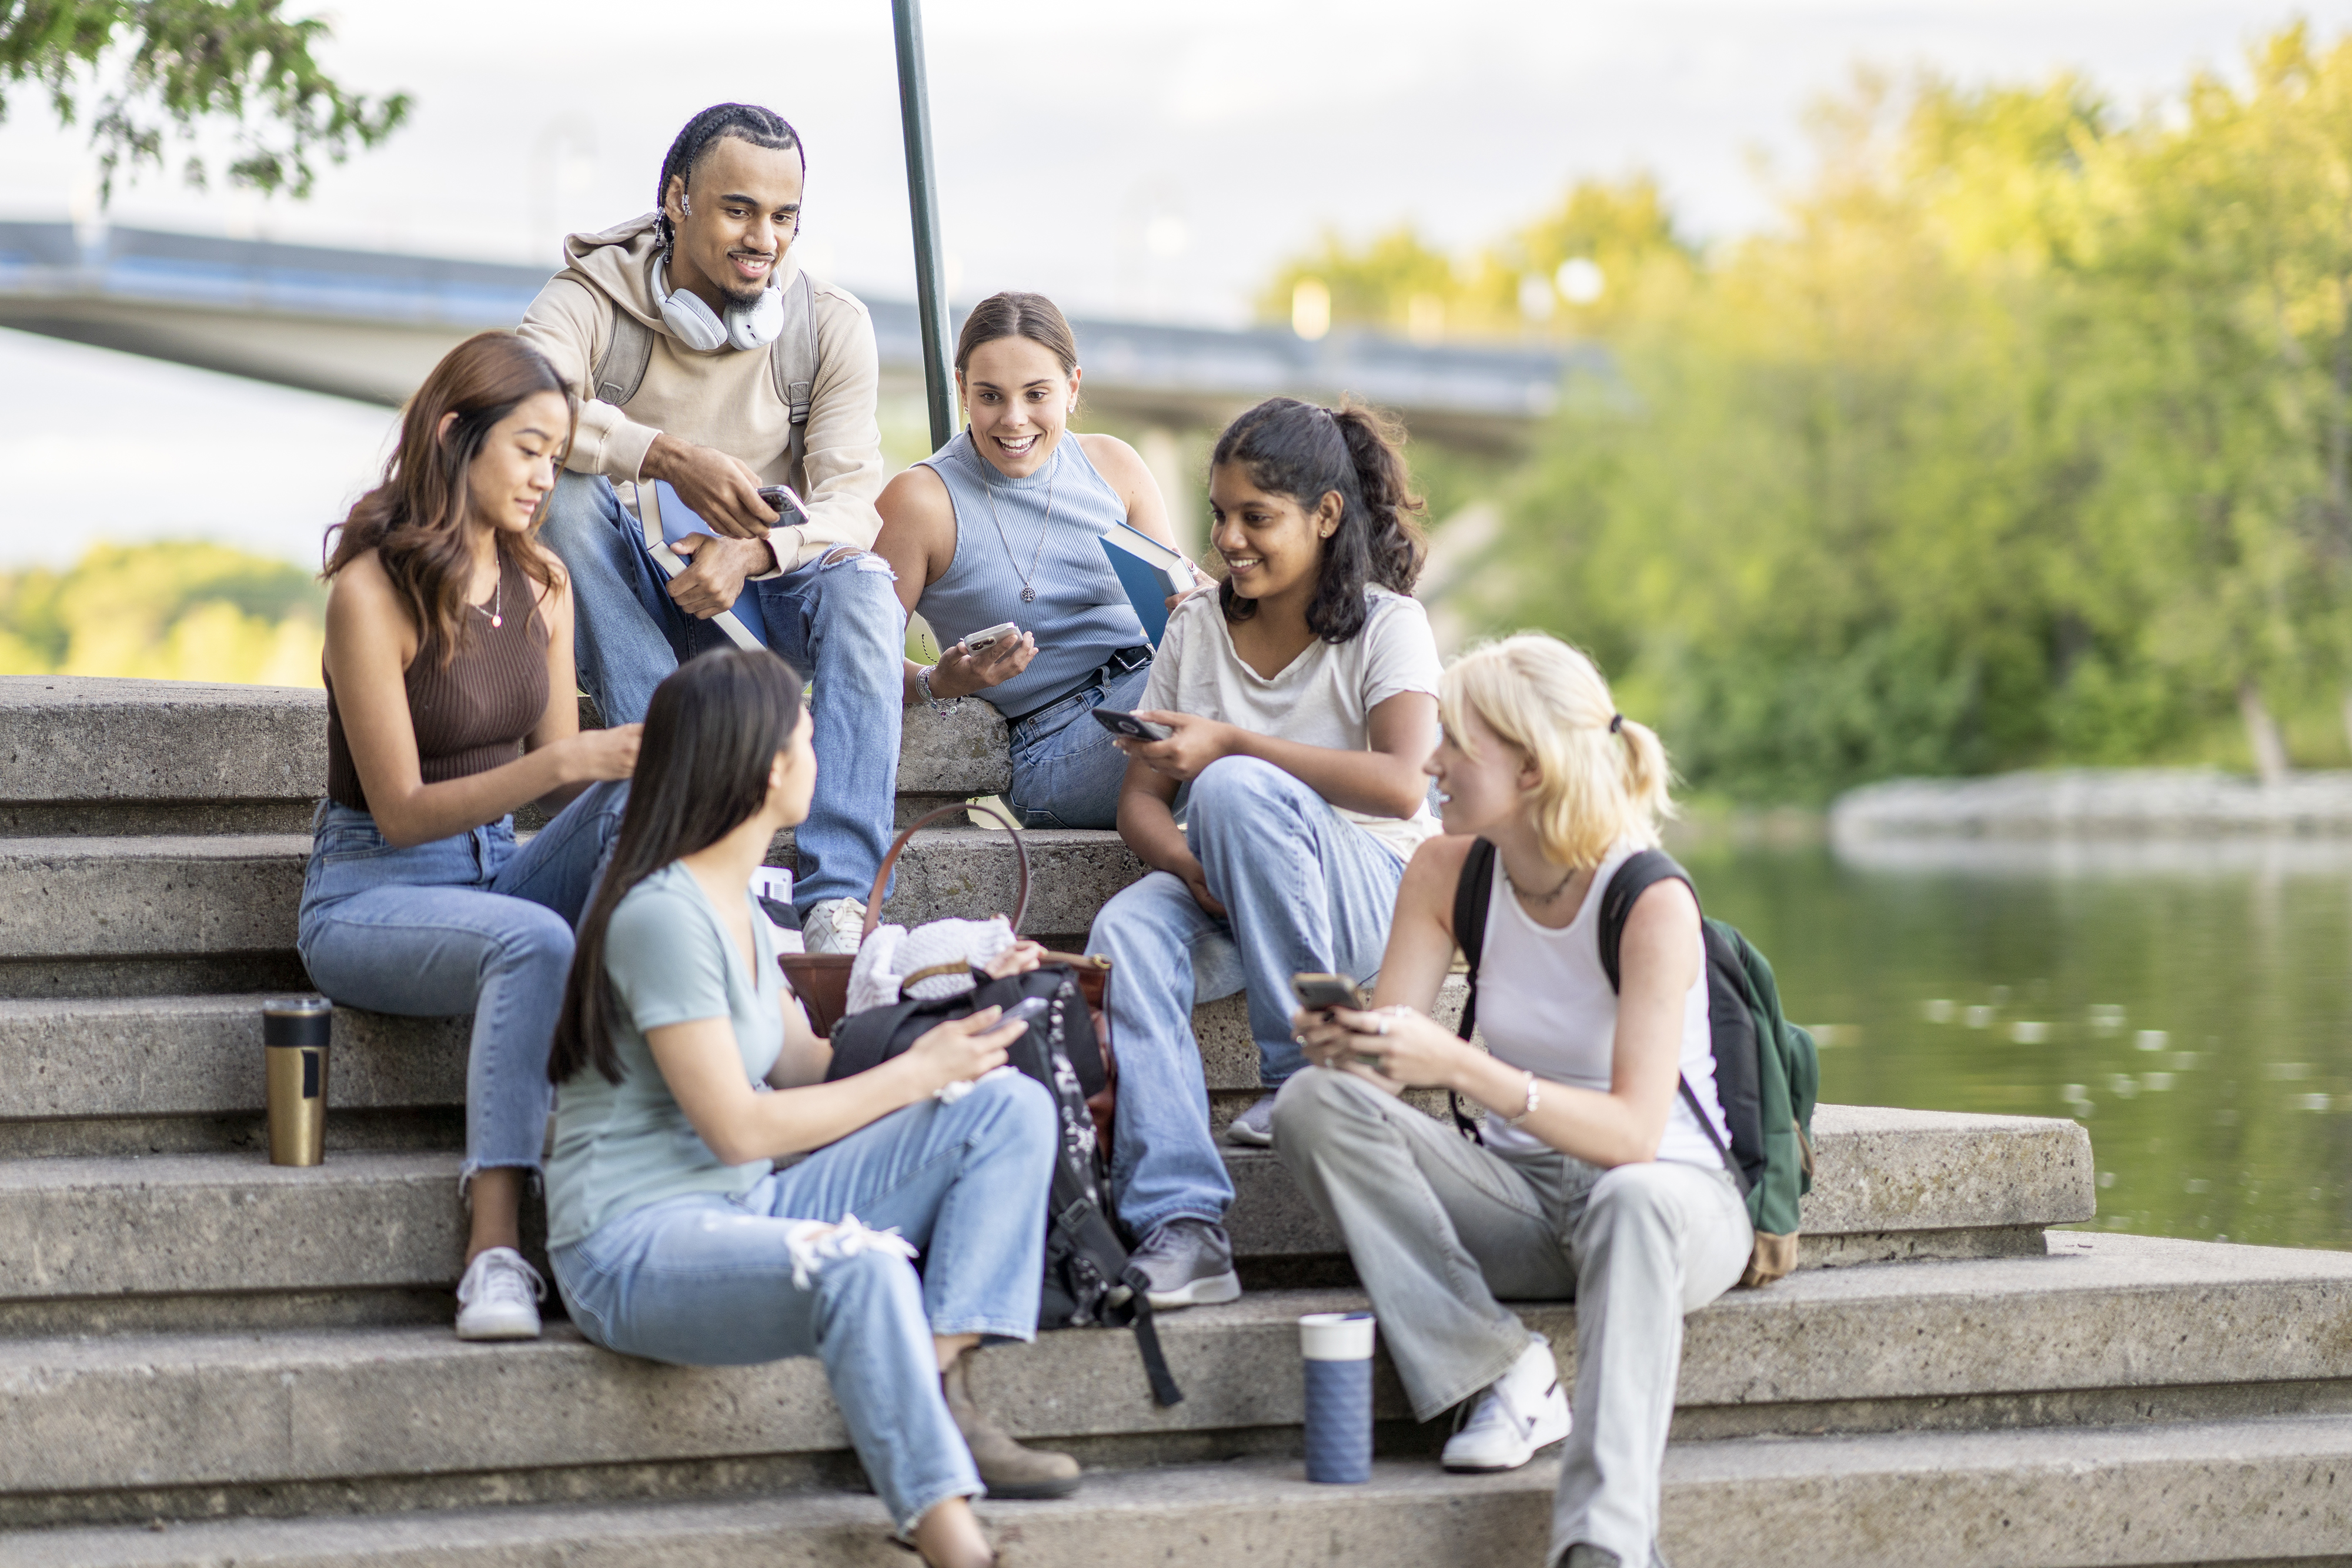 Group of diverse students in casual clothes sitting on stairs with phones, coffee